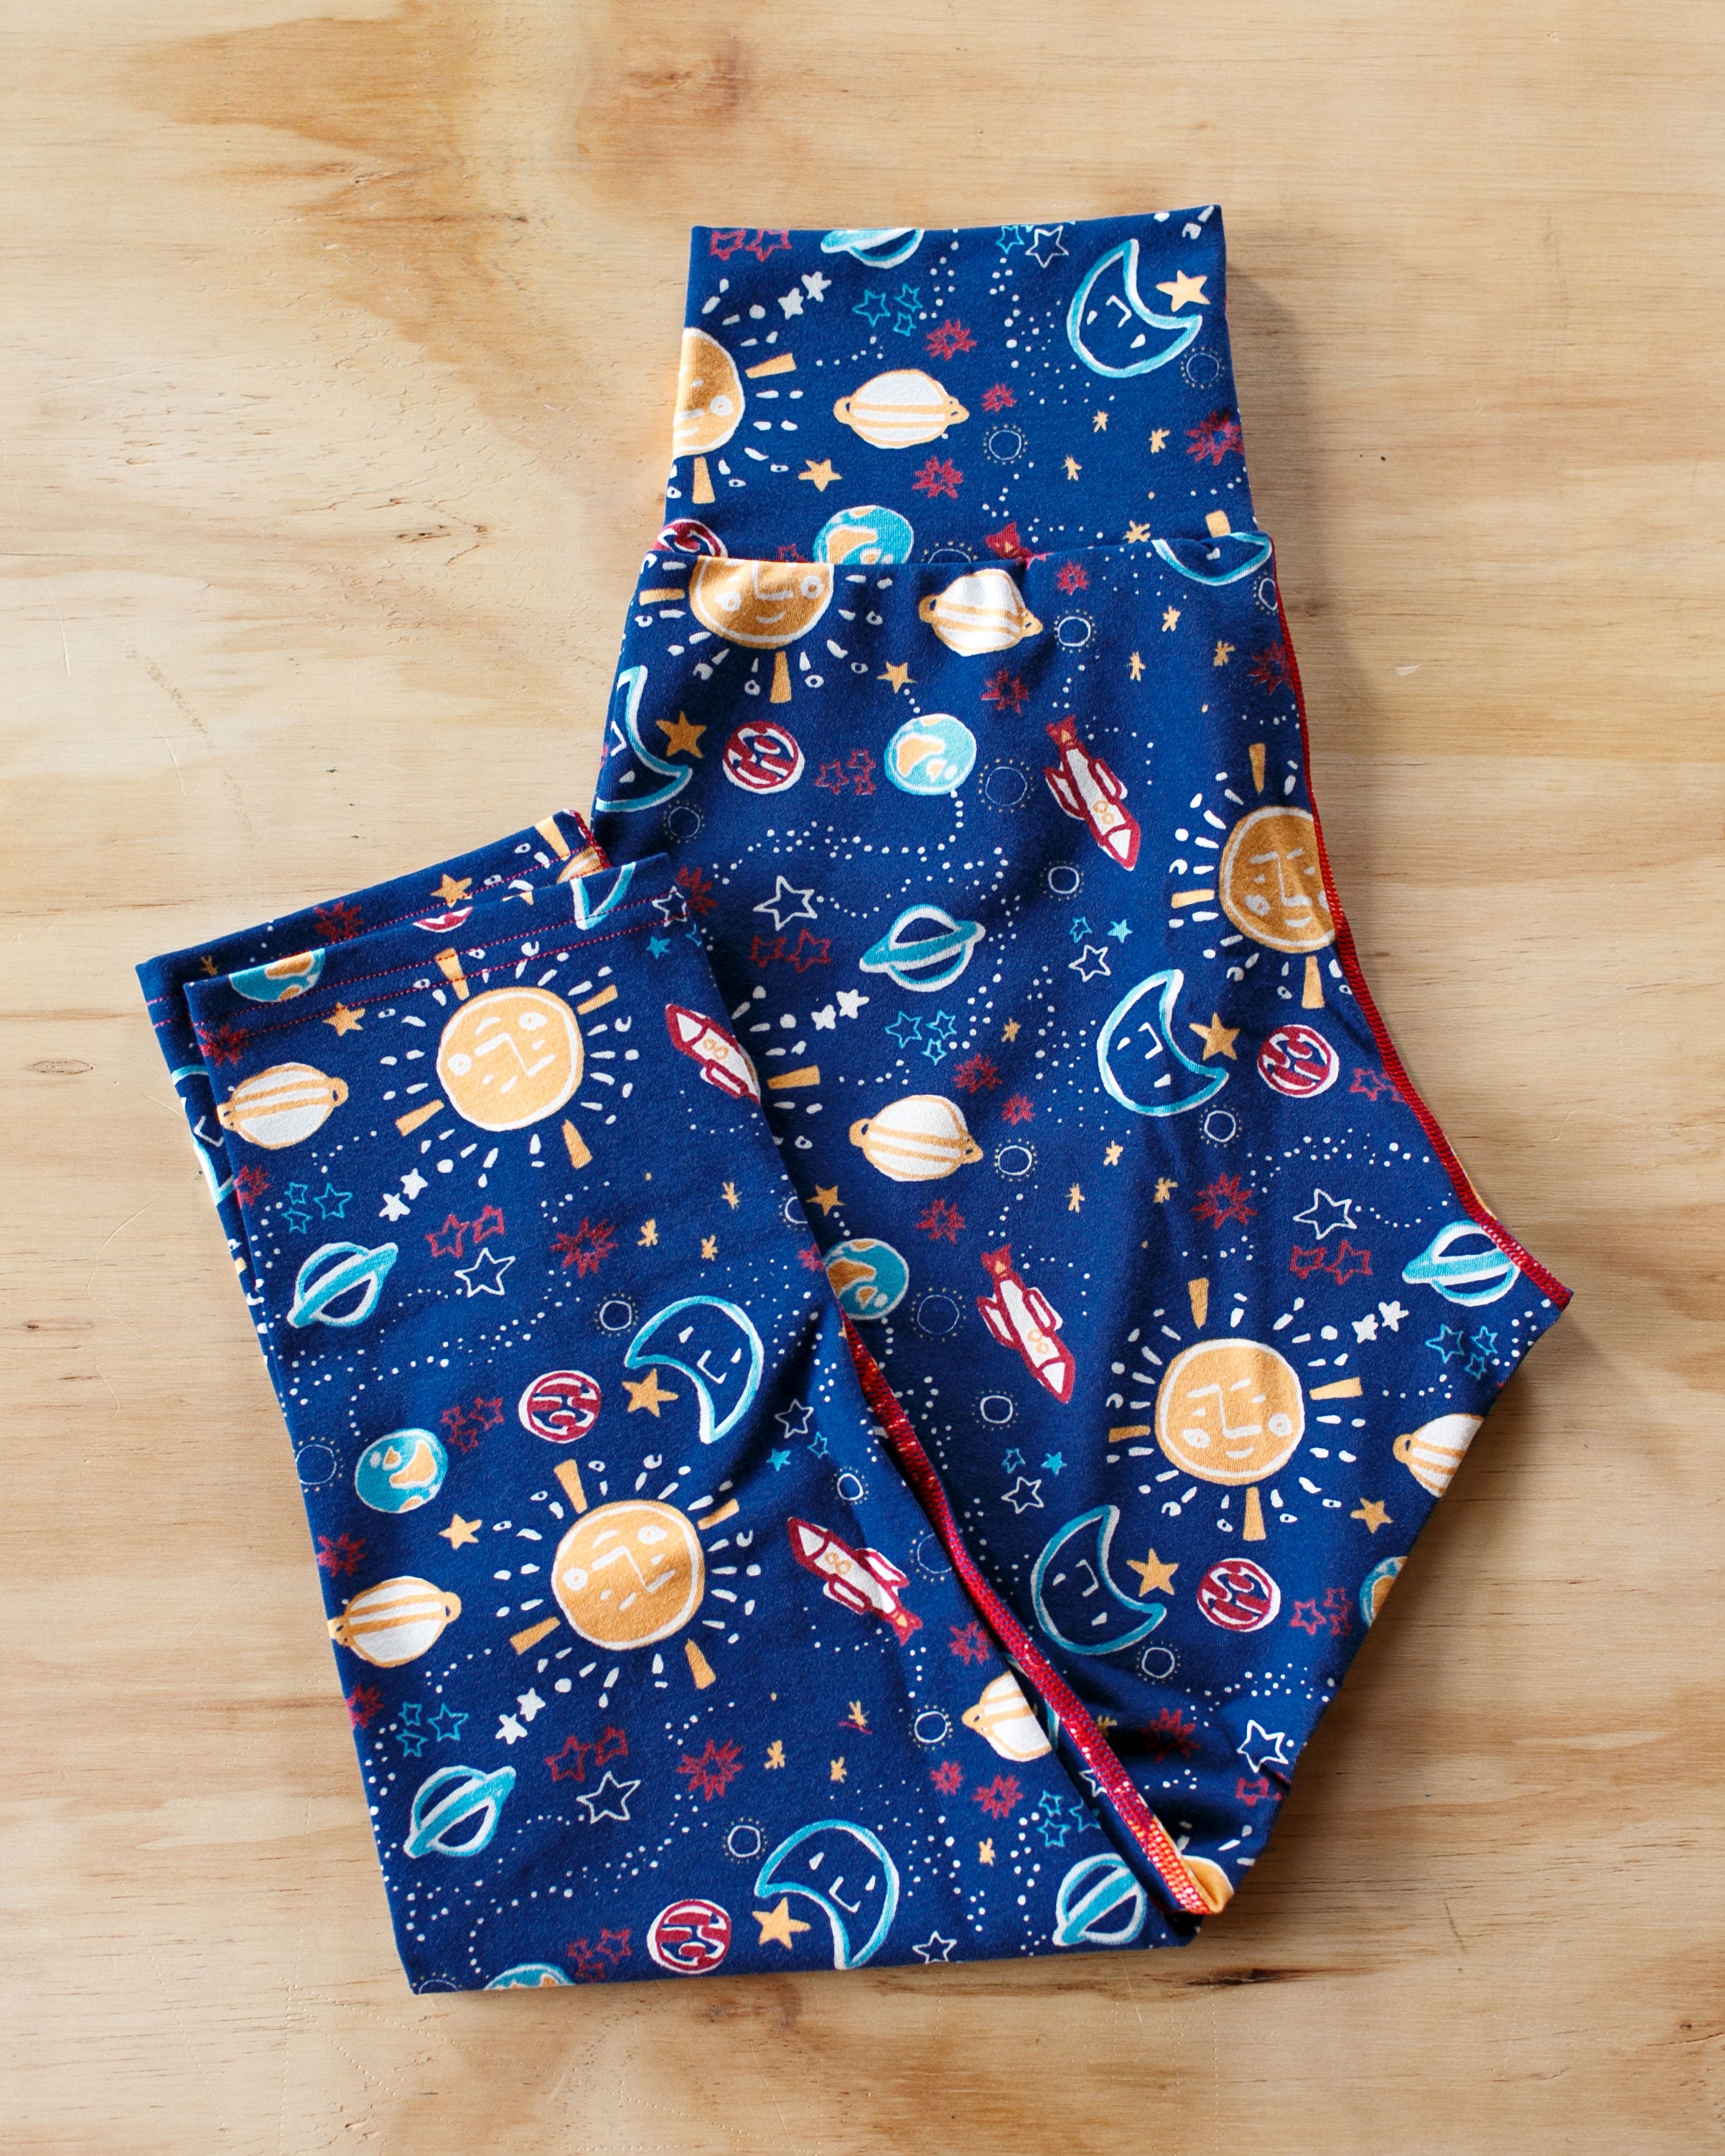 Flat-lay of Thunderpants organic cotton 3/4 leggings in our Dark Sky print: colorful drawings of the universe.